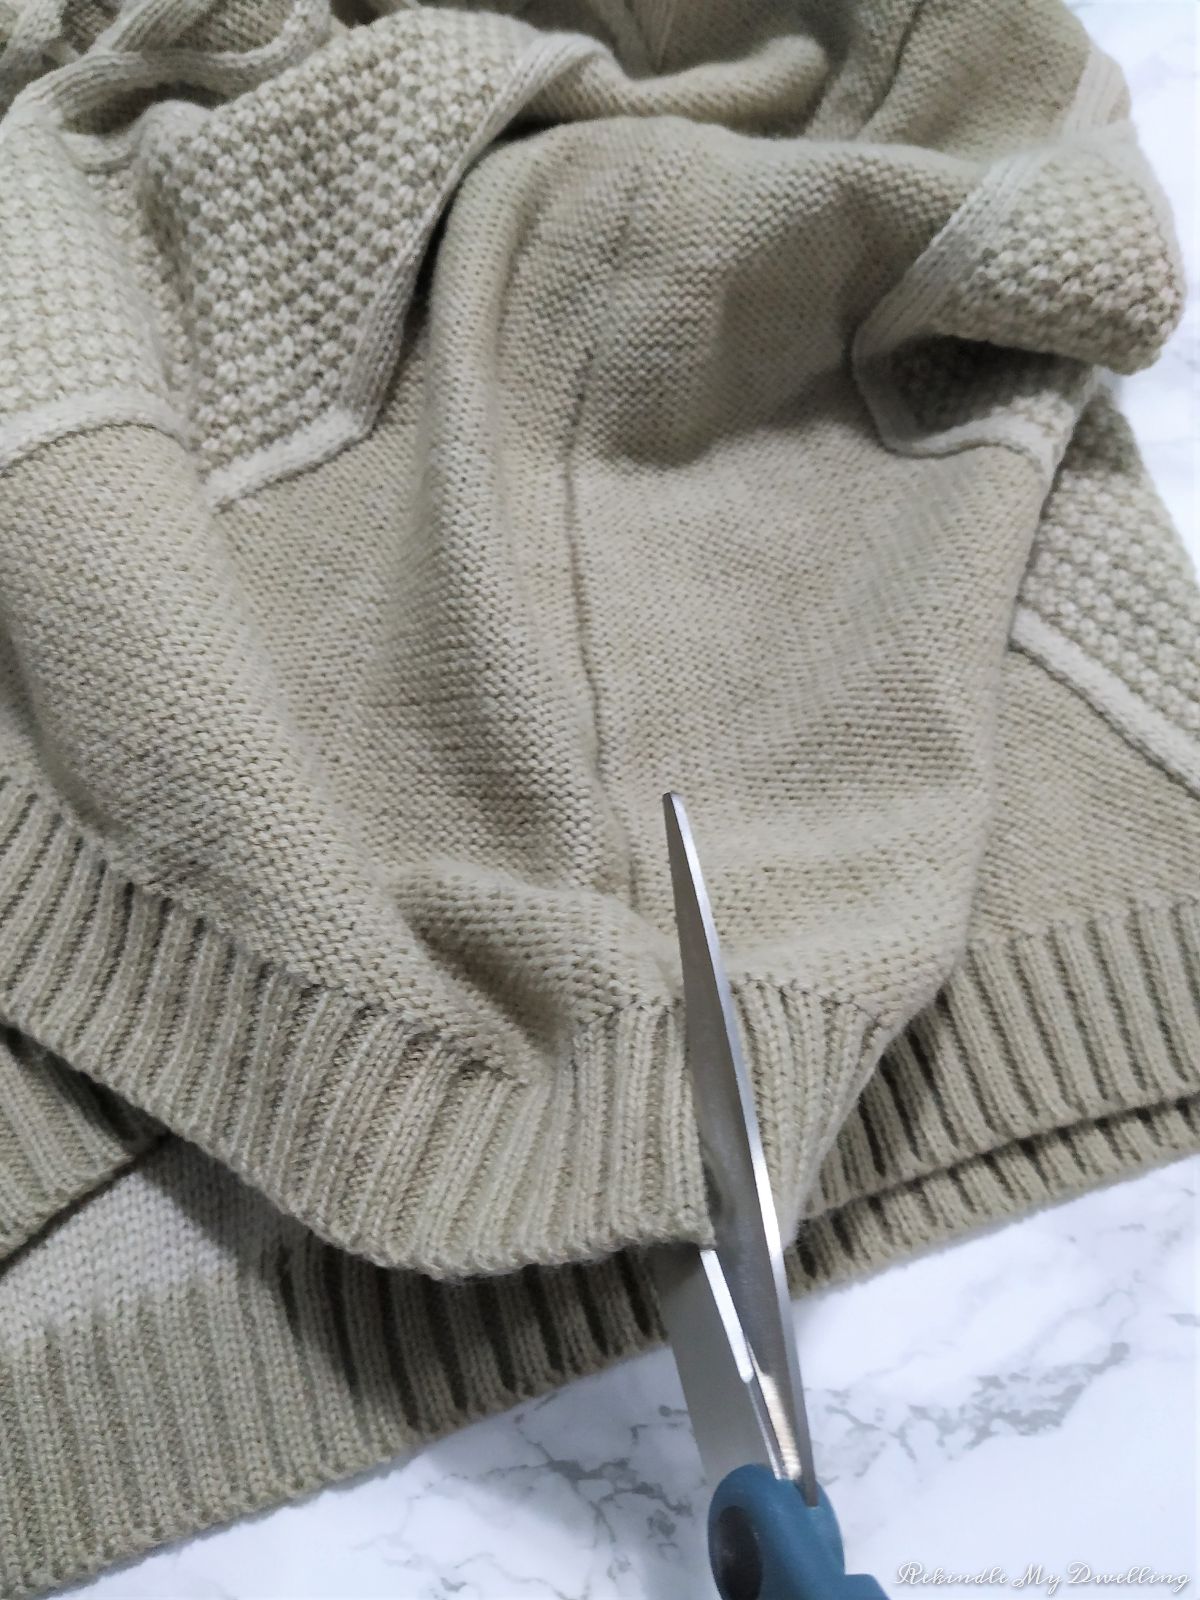 Cutting a sweater at the seams.